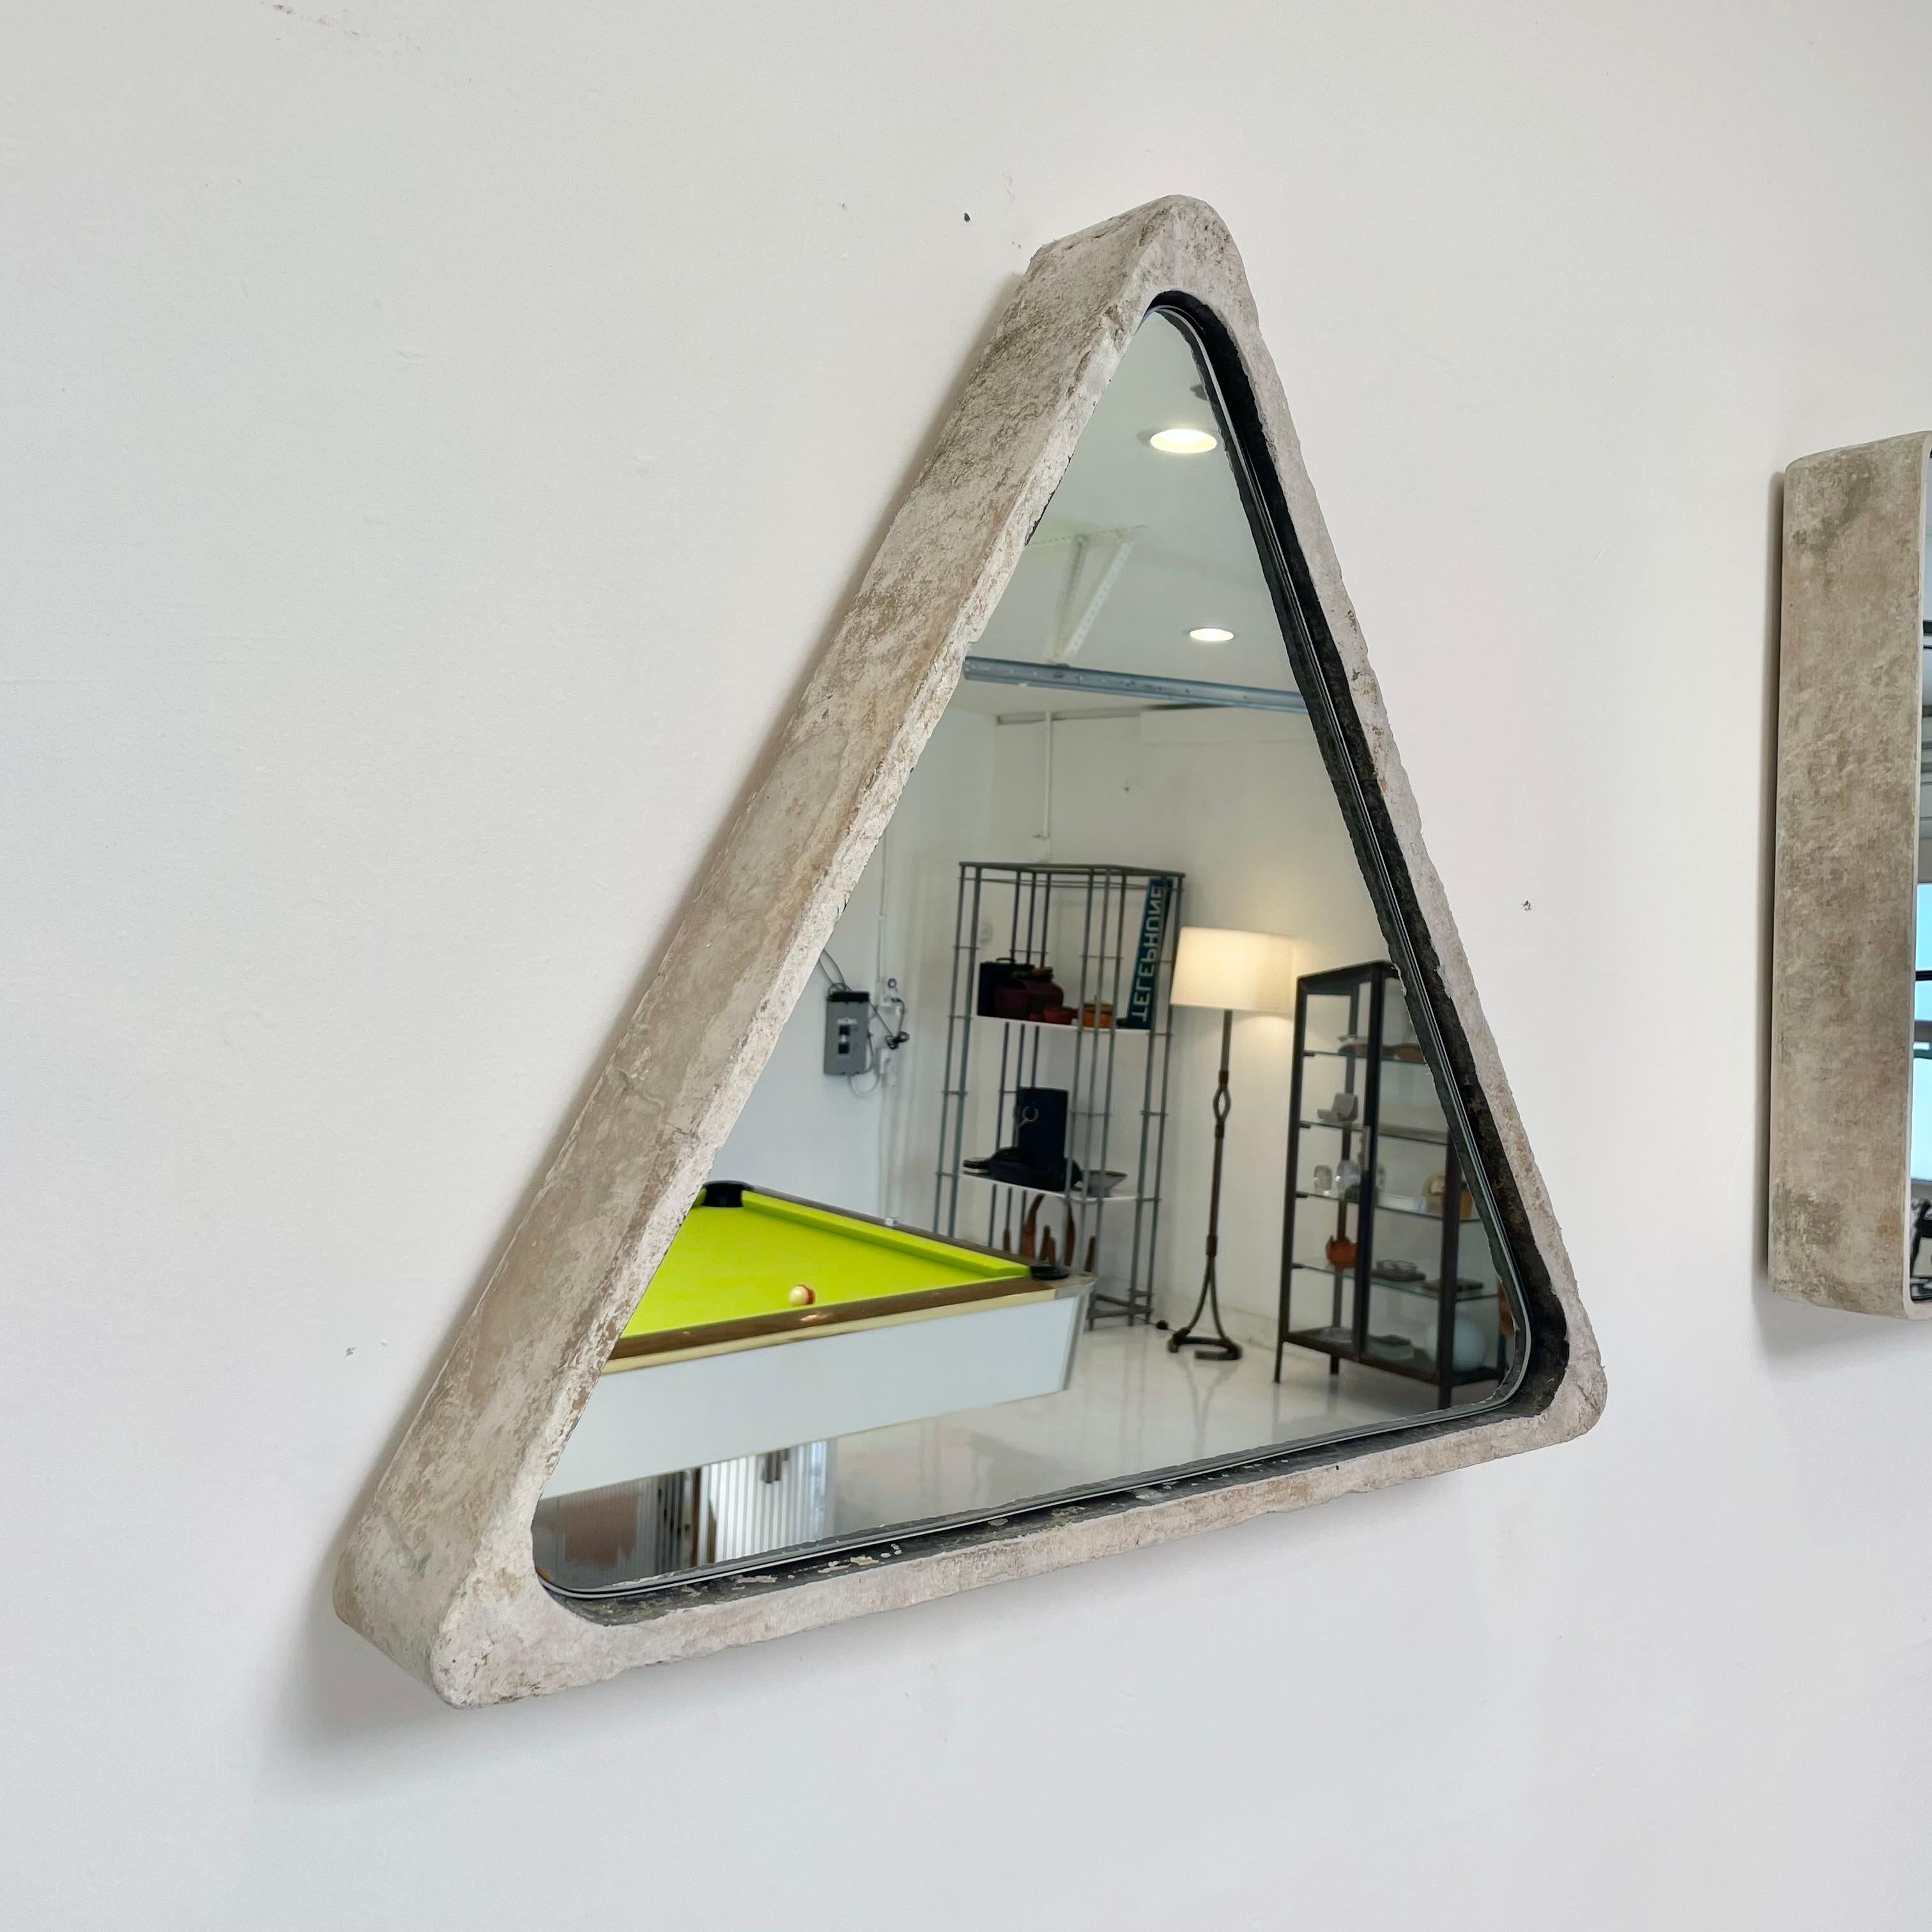 Fabulous triangular Willy Guhl concrete mirror. Concrete vessel originally produced at the Eternit factory in Switzerland in the 1960’s and mirror was professionally hand cut and added recently. Beautiful patina as expected with age featuring myriad